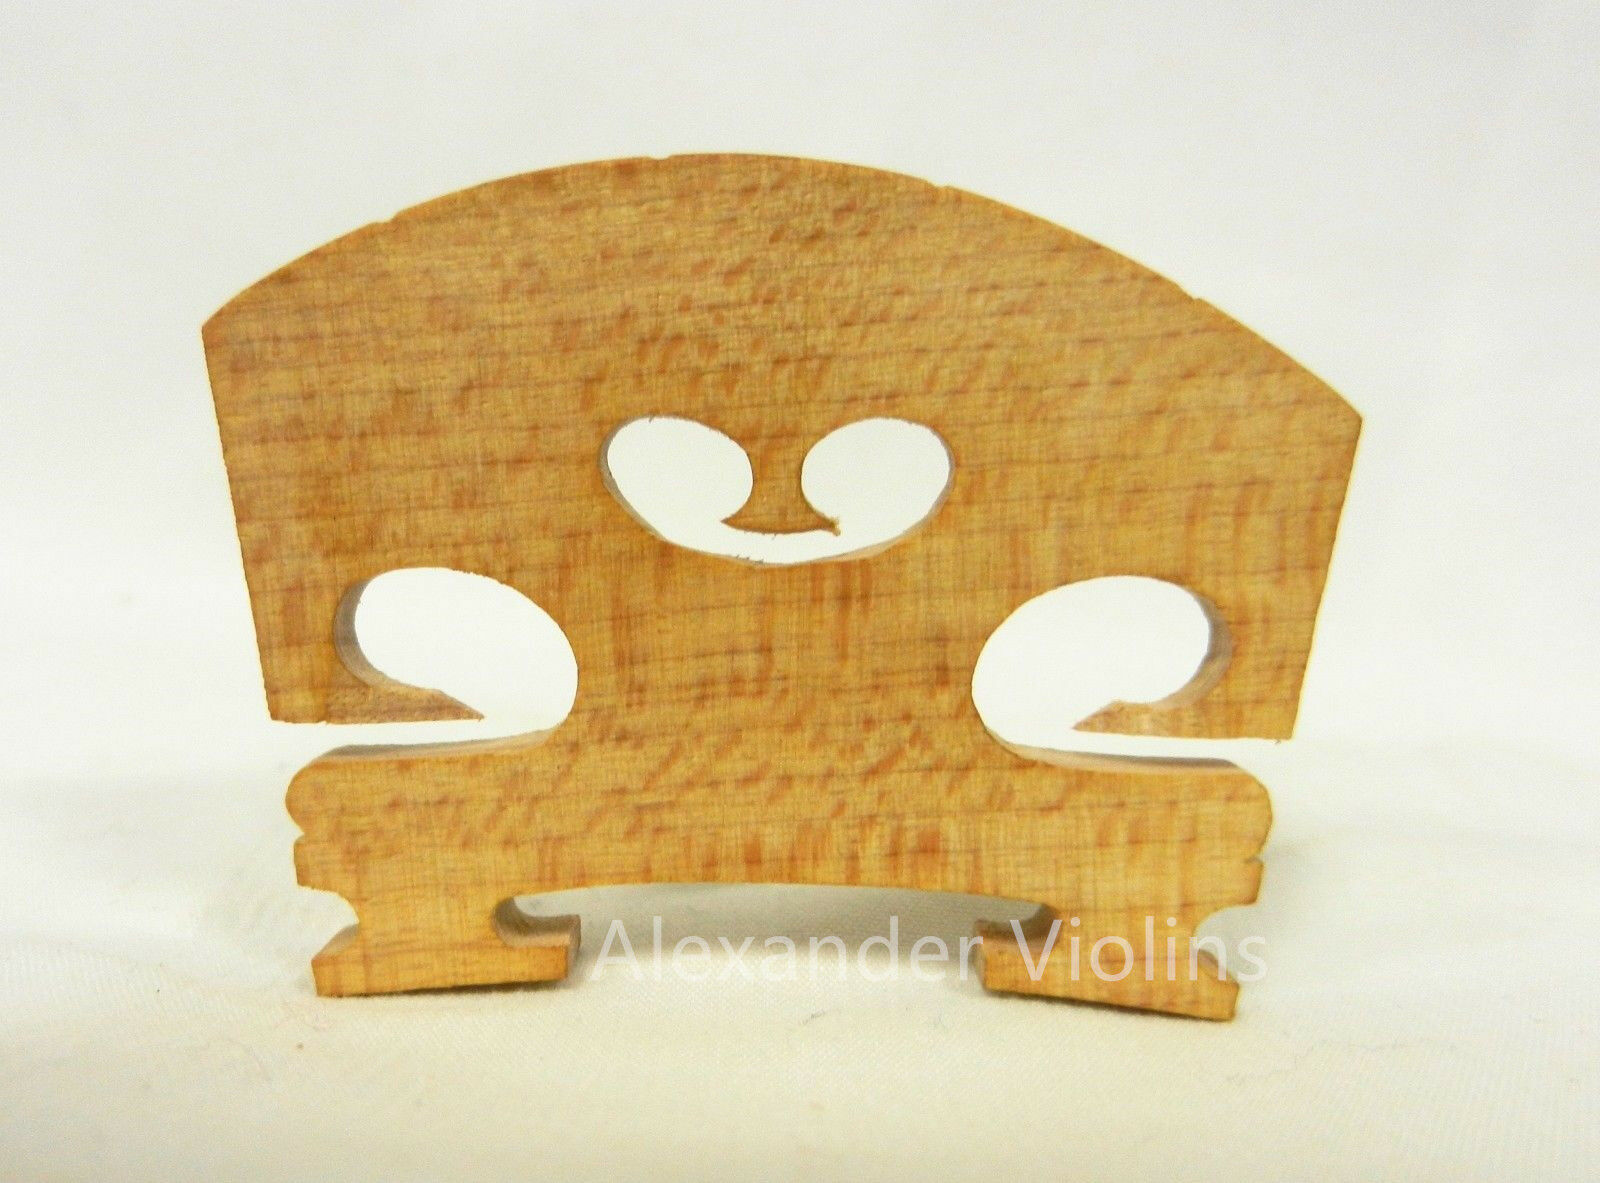 Quality Pre Fitted Violin Bridge,choose Size- 4/4 3/4 1/2 1/4 1/8,free Shipping!